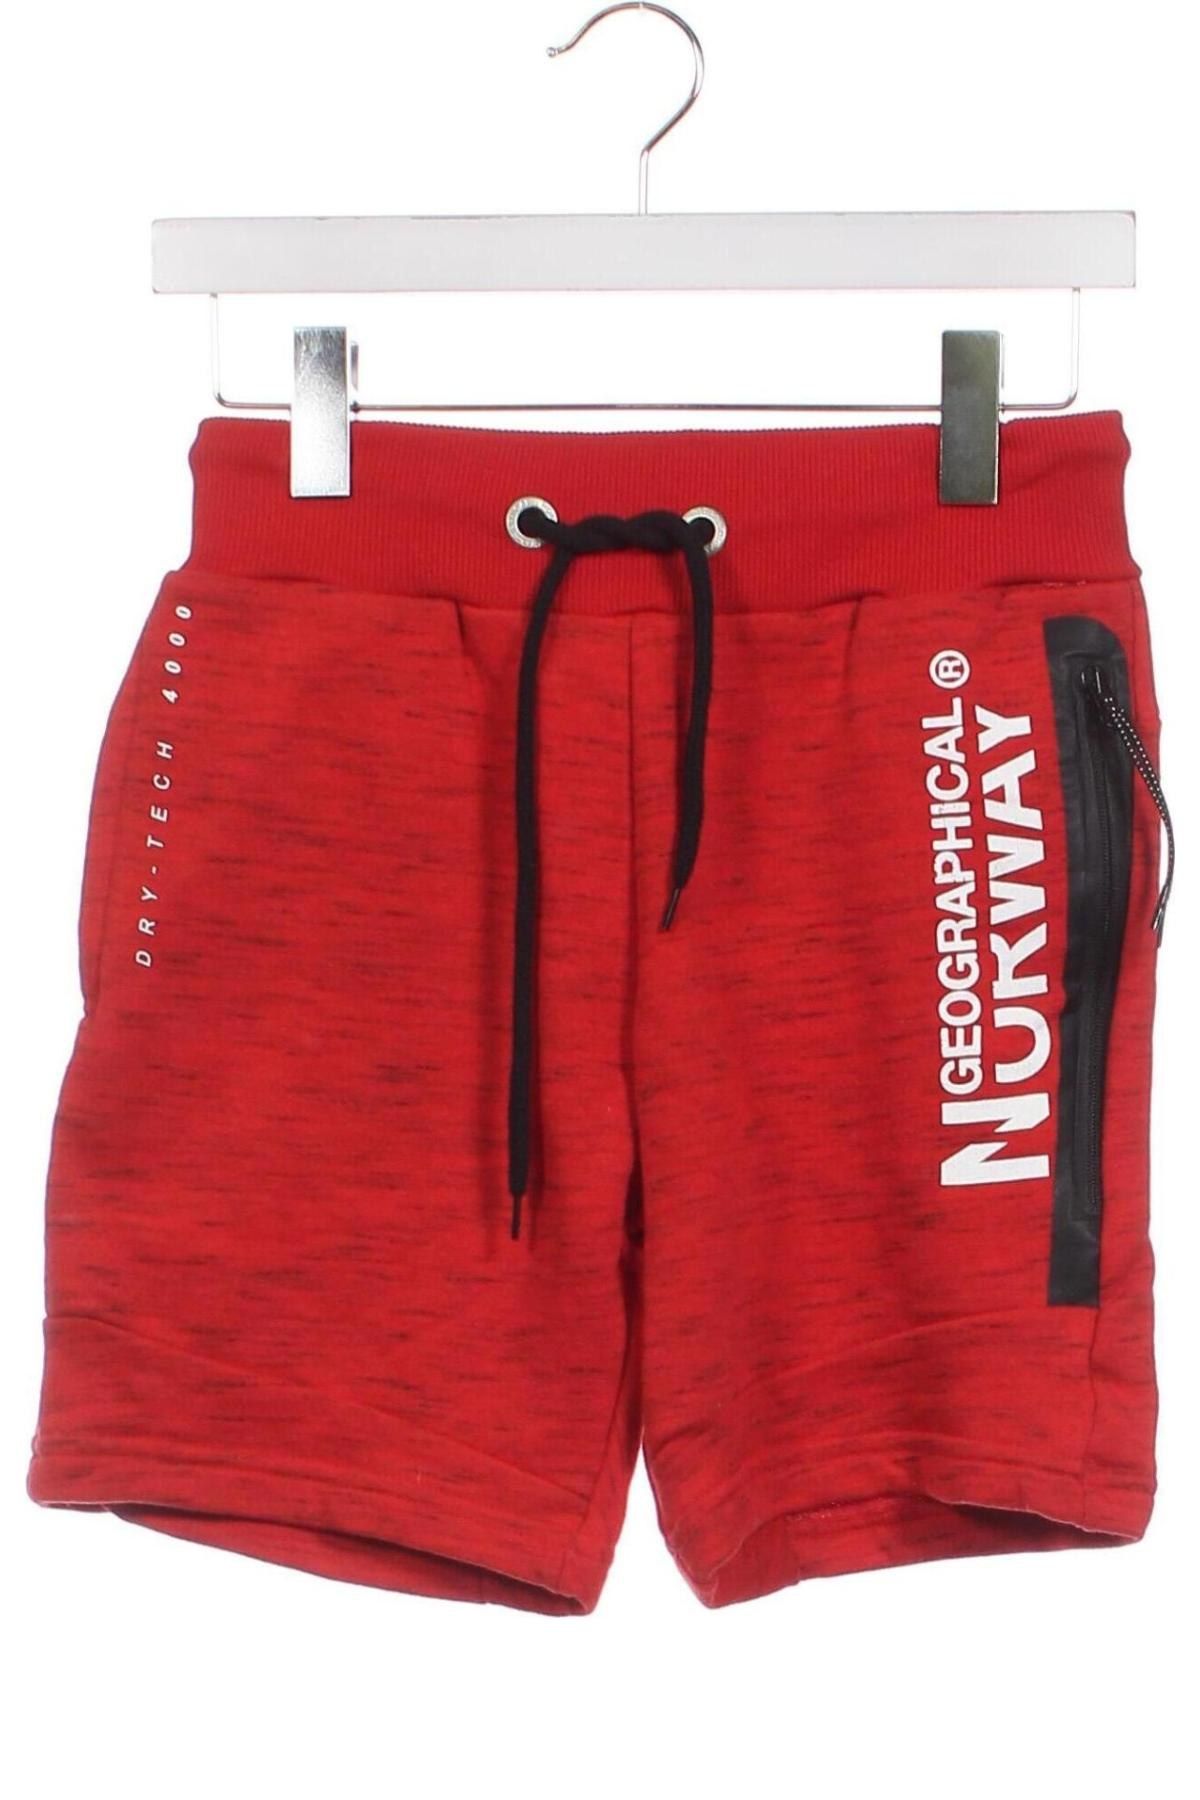 Kinder Shorts Geographical Norway, Größe 7-8y/ 128-134 cm, Farbe Rot, Preis 30,41 €